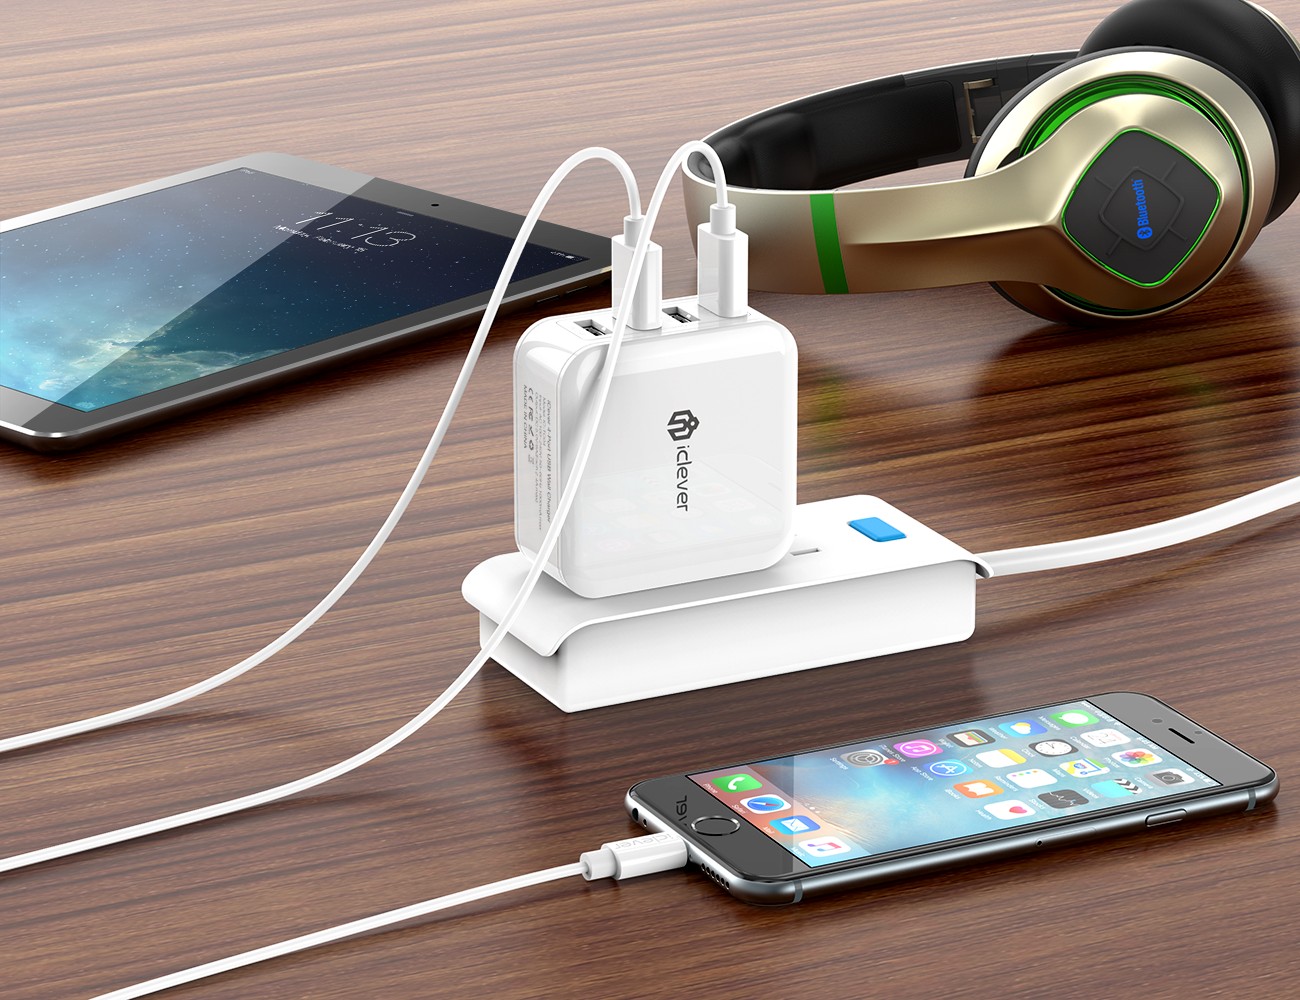 iClever BoostCube 4-Port USB Wall Charger